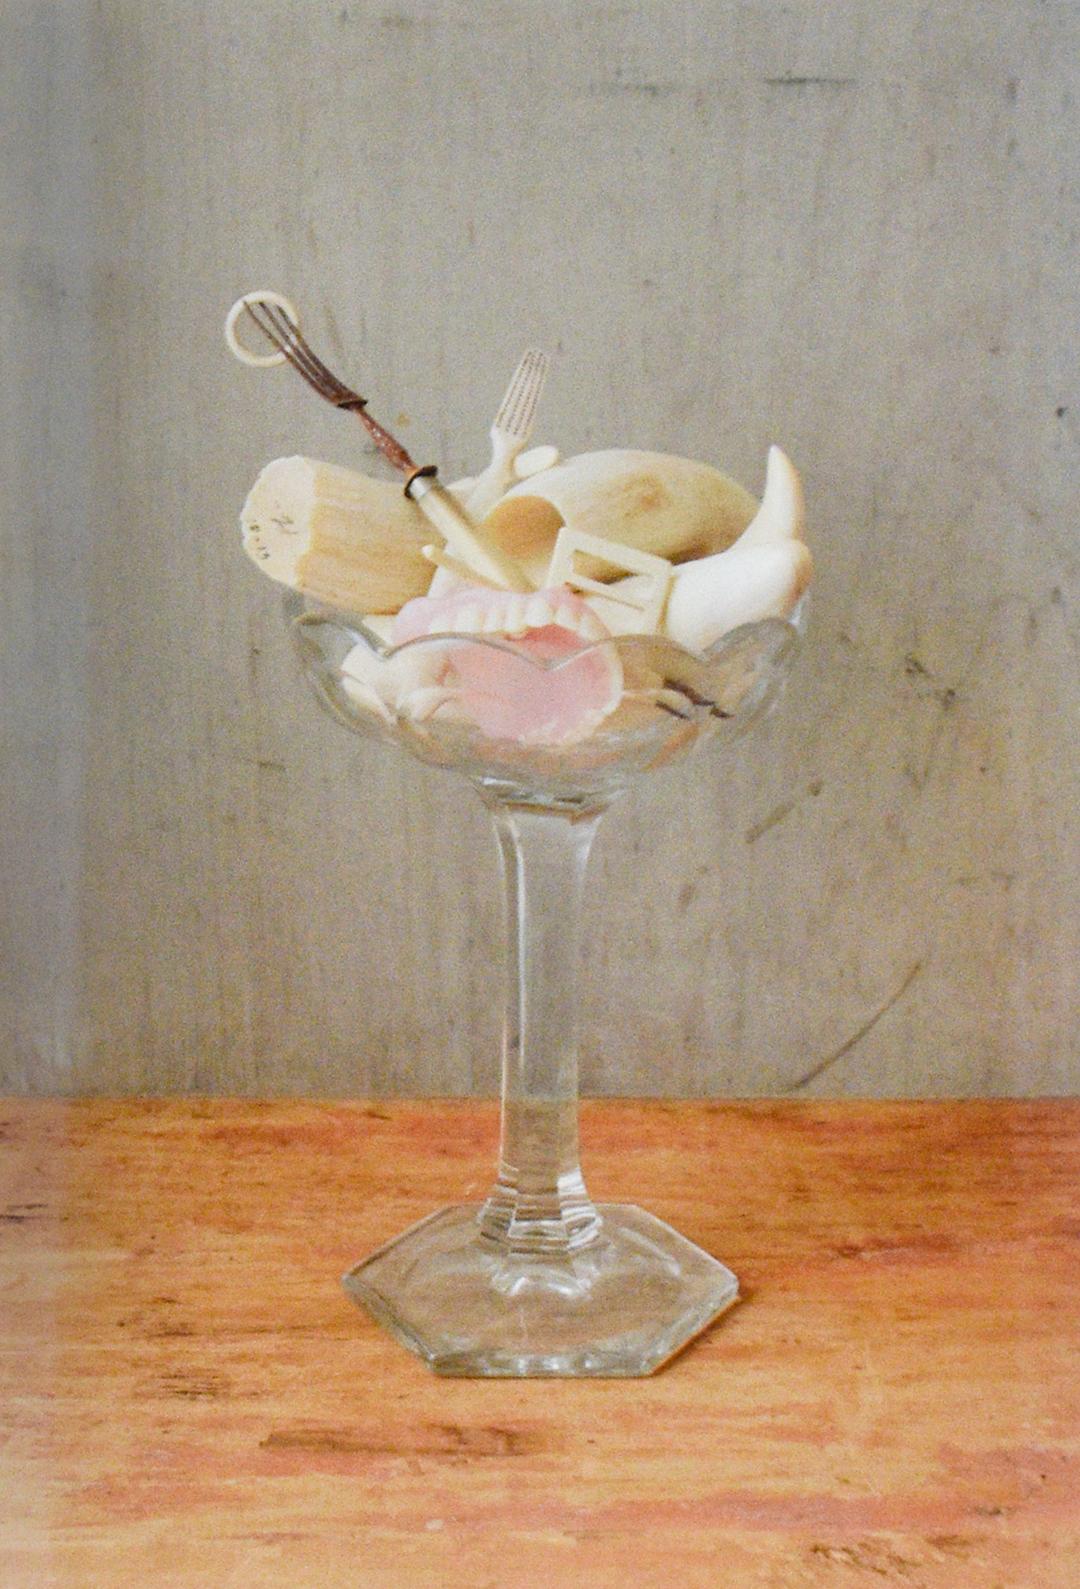 Compote with Teeth (Still Life Photograph of White Teeth in a Glass Cup)